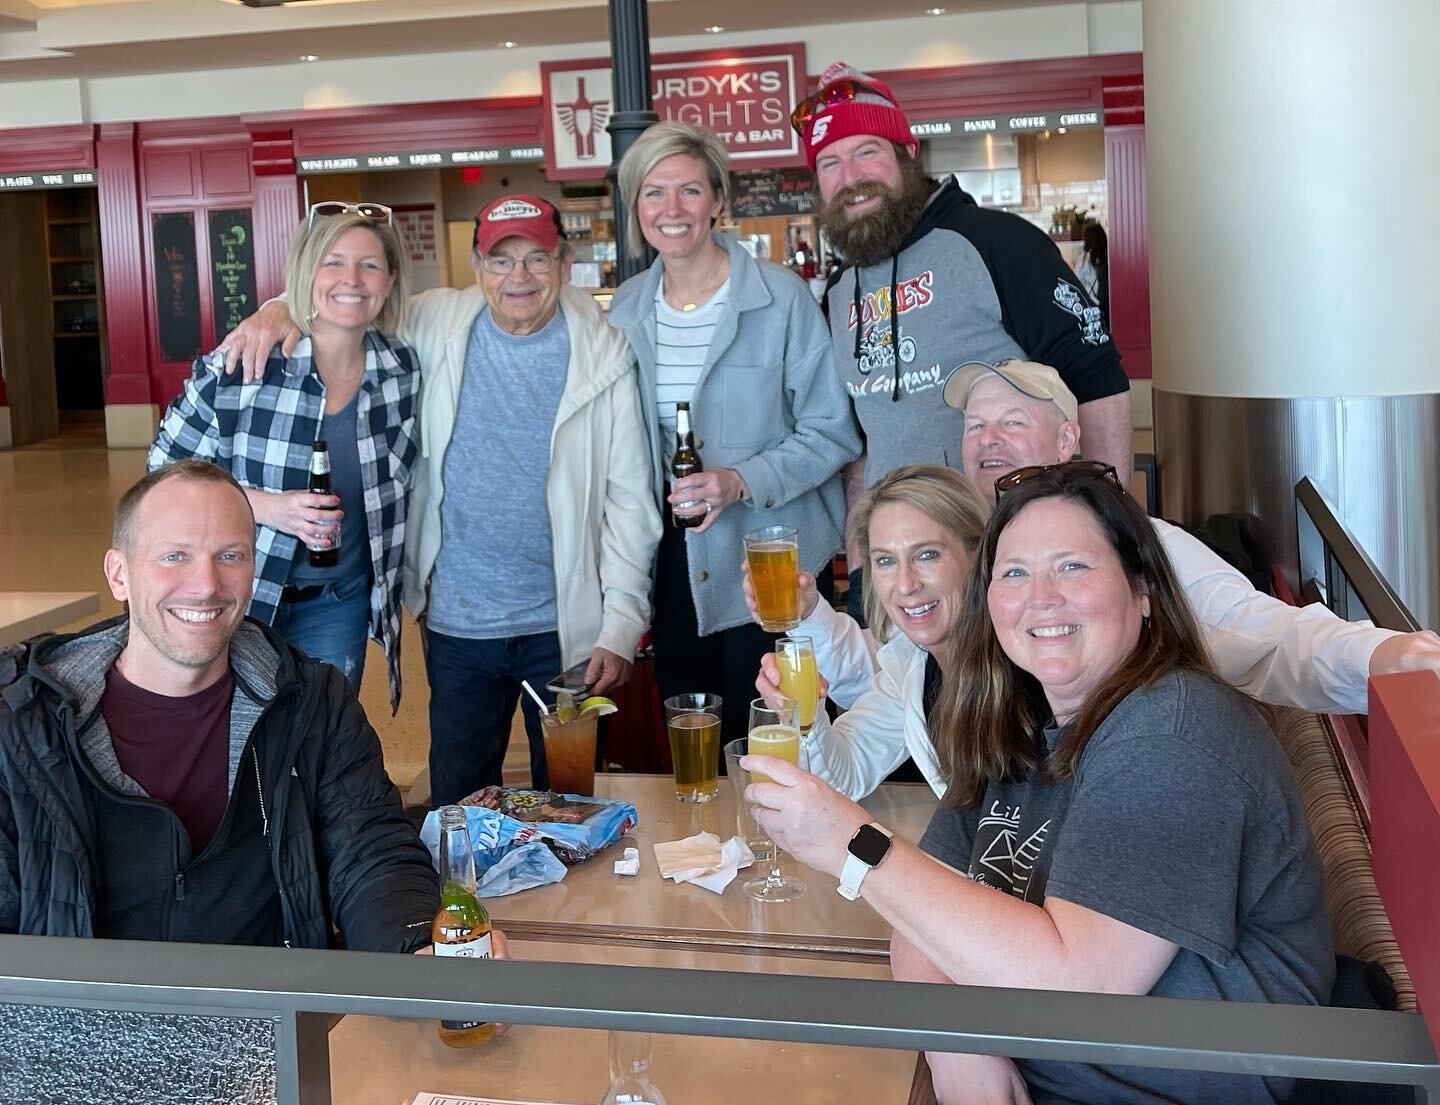 Ran into some great people from Stearns County at the MSP airport. #stearnscounty #johnnyholm #thejohnnyholmband #johnnyholmband